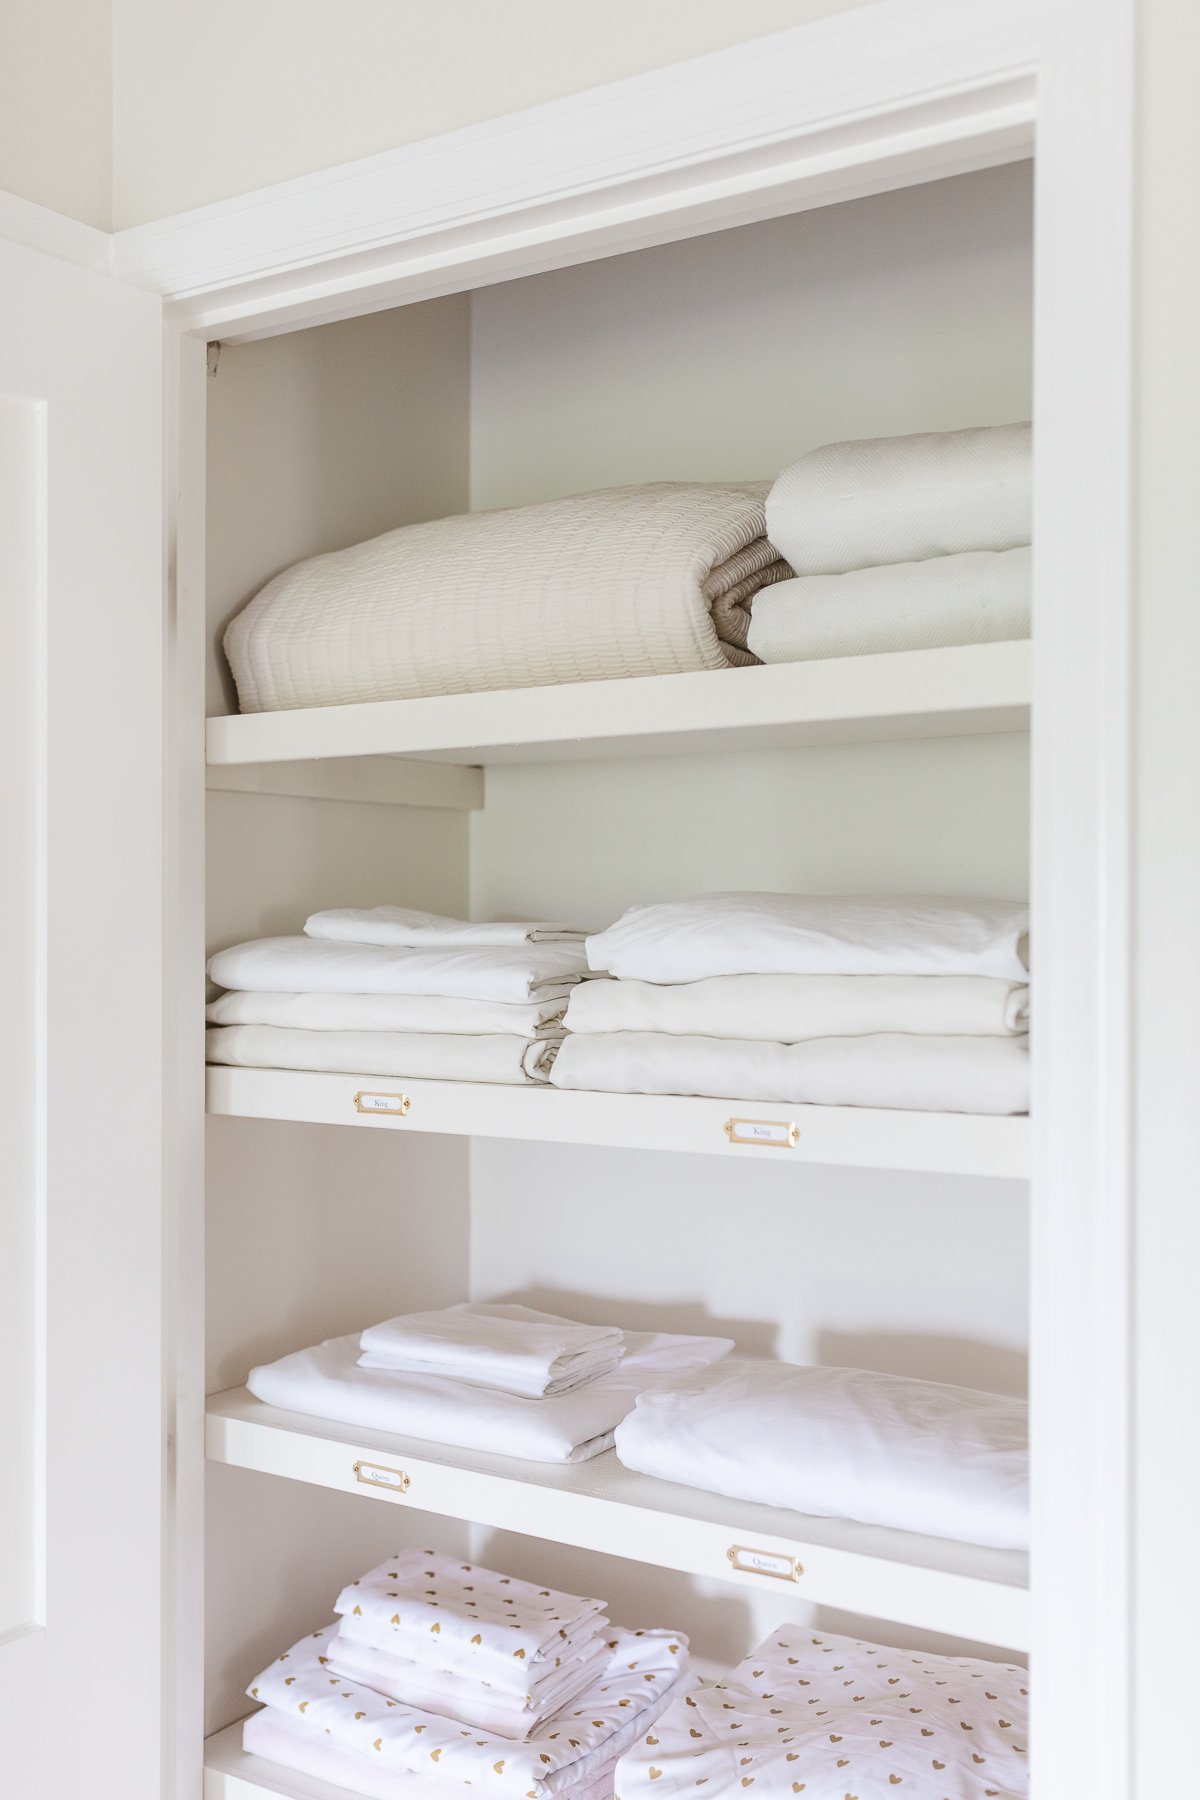 A linen closet with white sheets and towels.